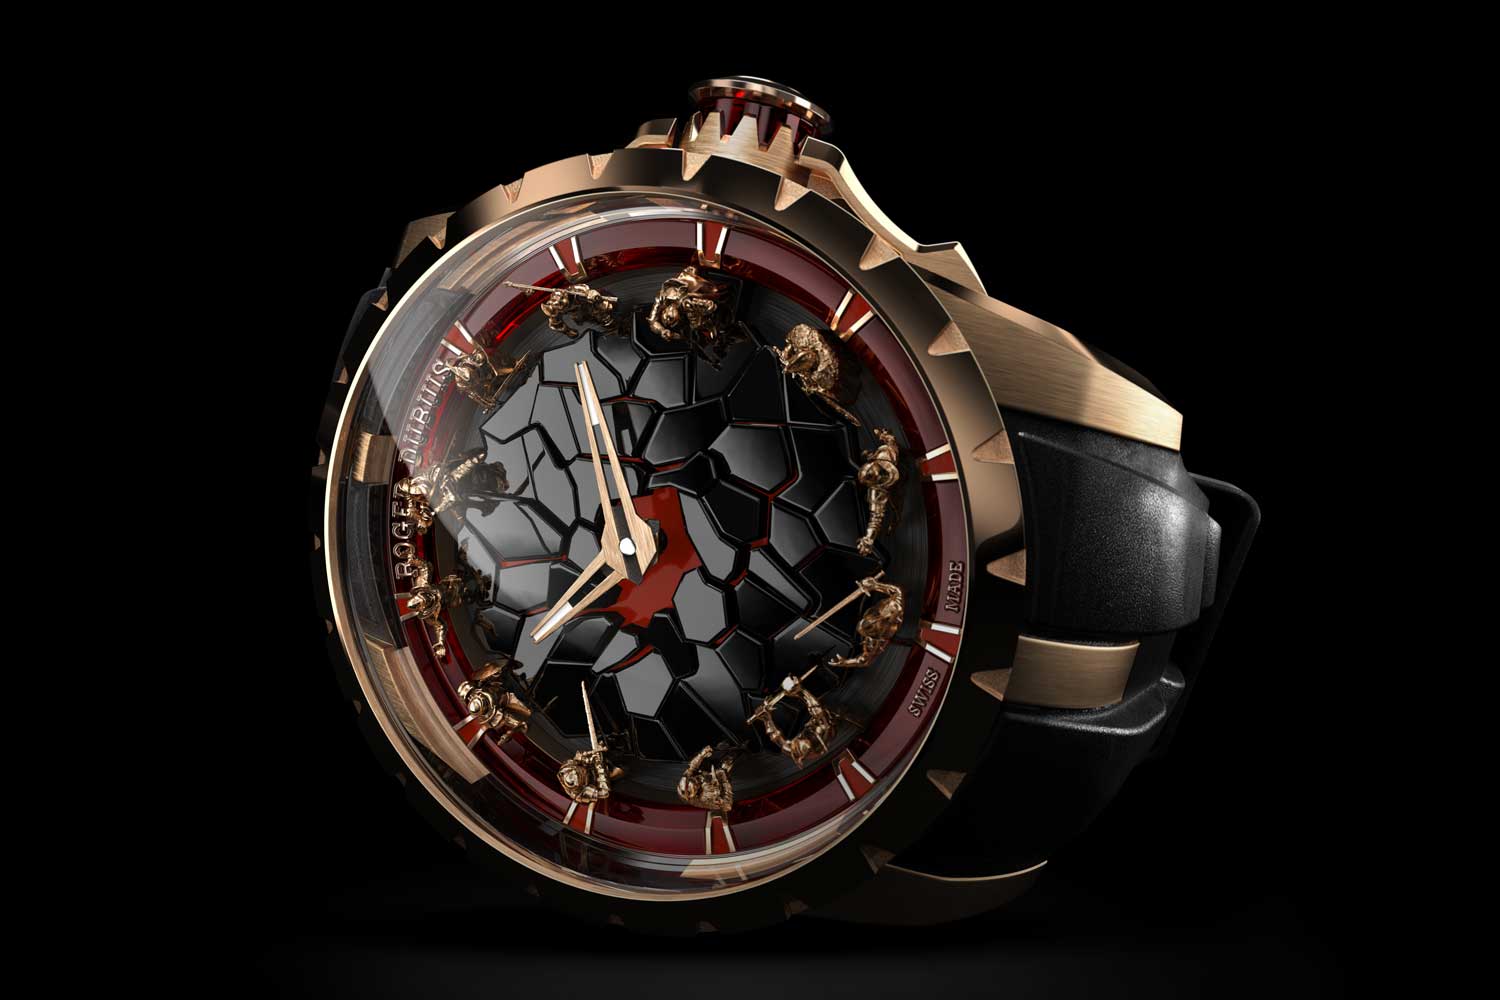 Roger Dubuis “Knights of the Round Table”